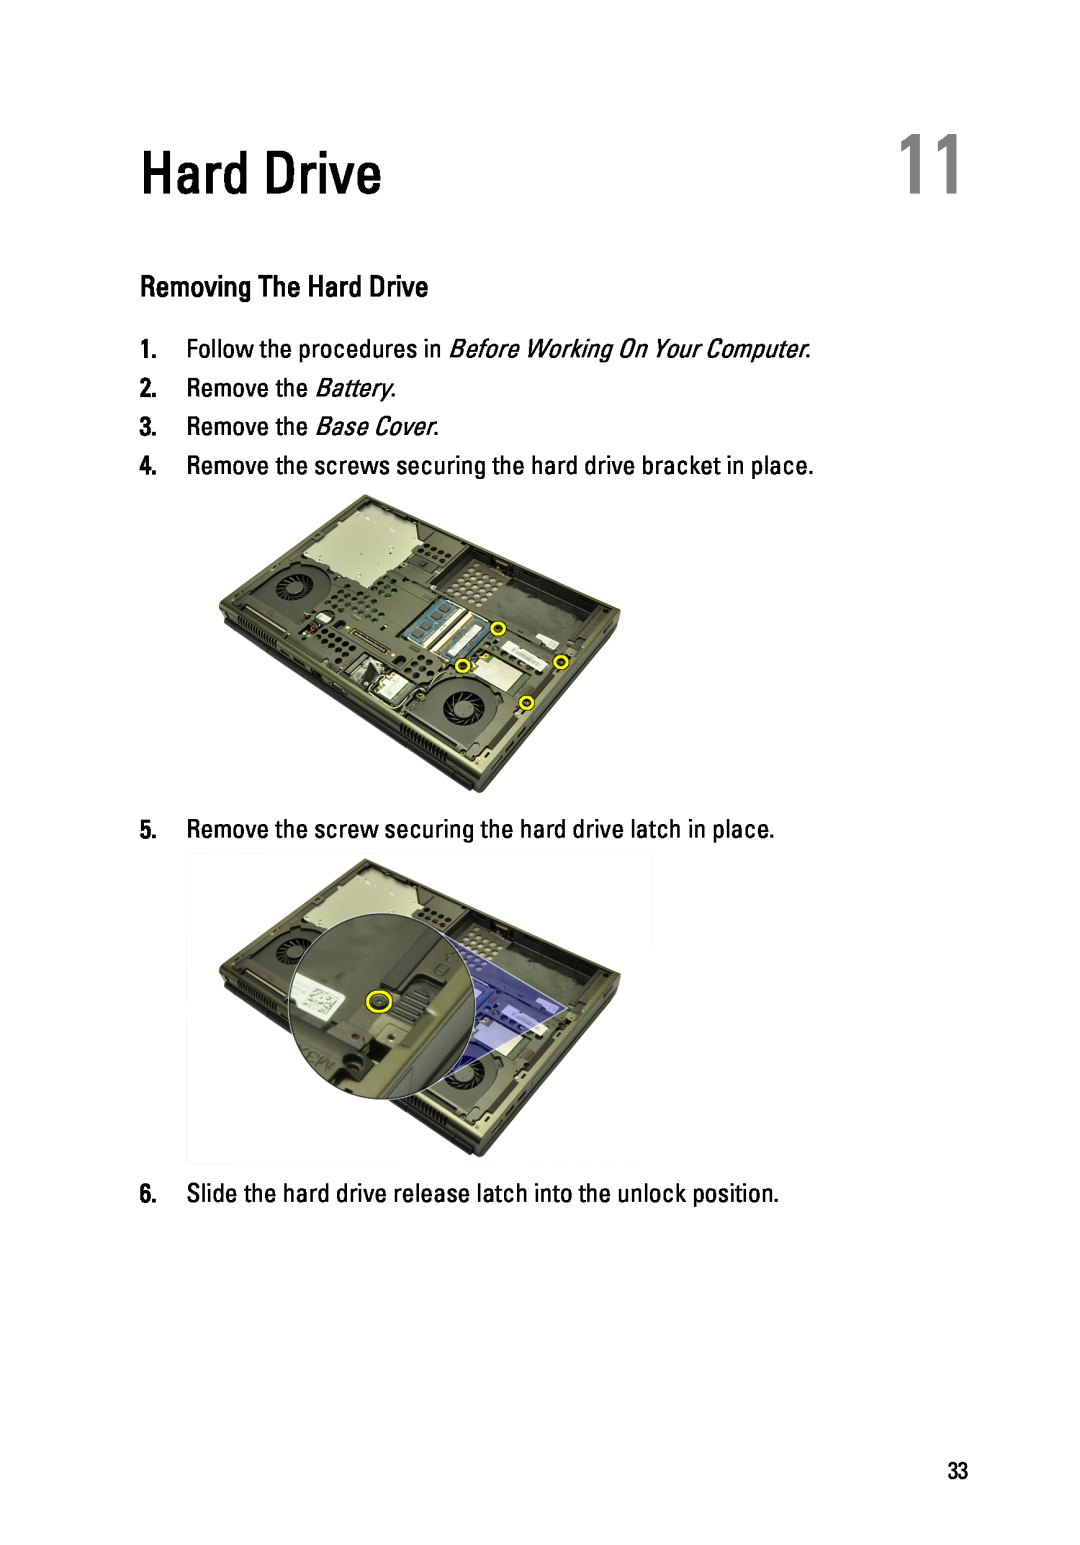 Dell M4600 owner manual Removing The Hard Drive, Remove the Battery 3. Remove the Base Cover 